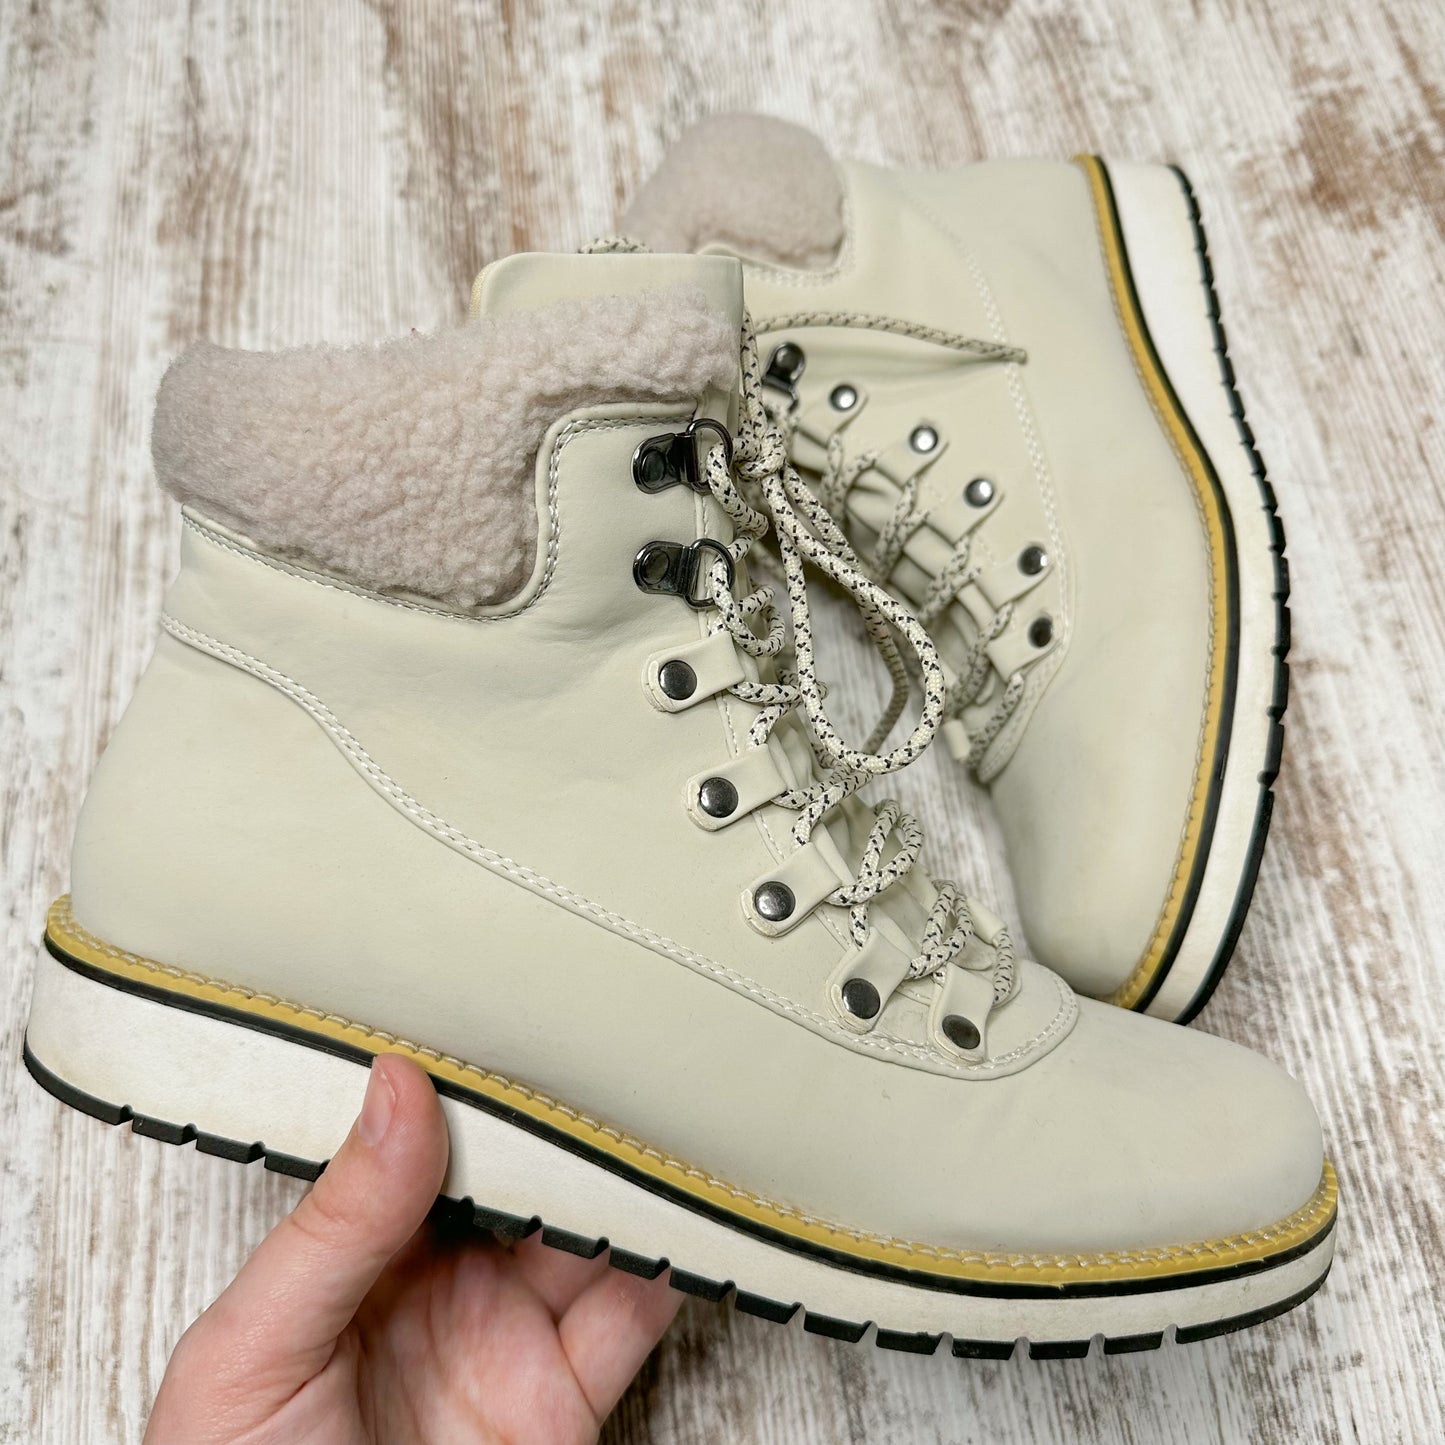 Aspen Nomad Stone Water Resistant Boots Size 9